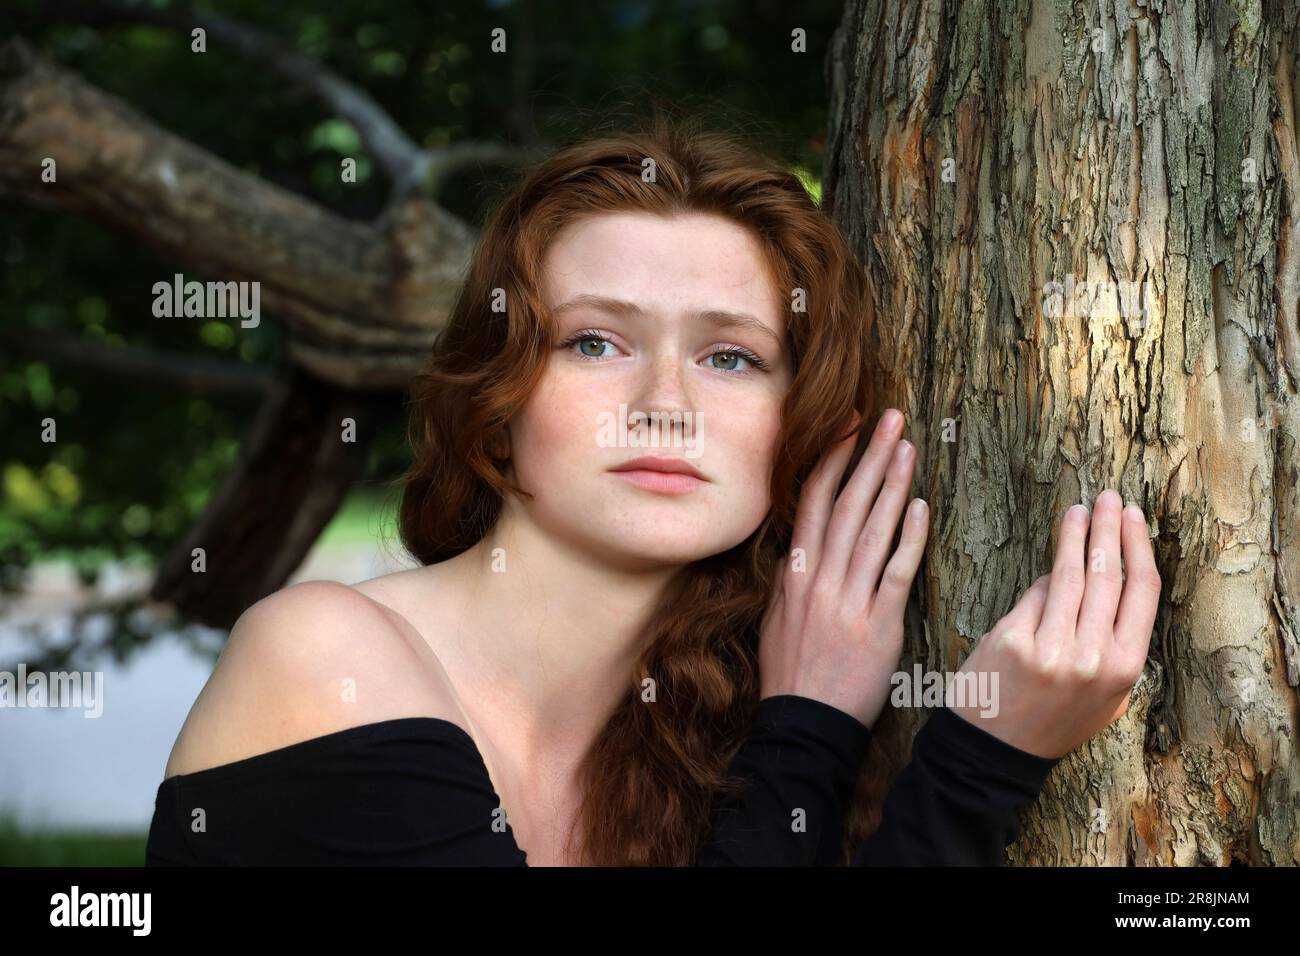 Girl with long red hair and freckles standing near the tree in summer park. Depression and sad mood Stock Photo